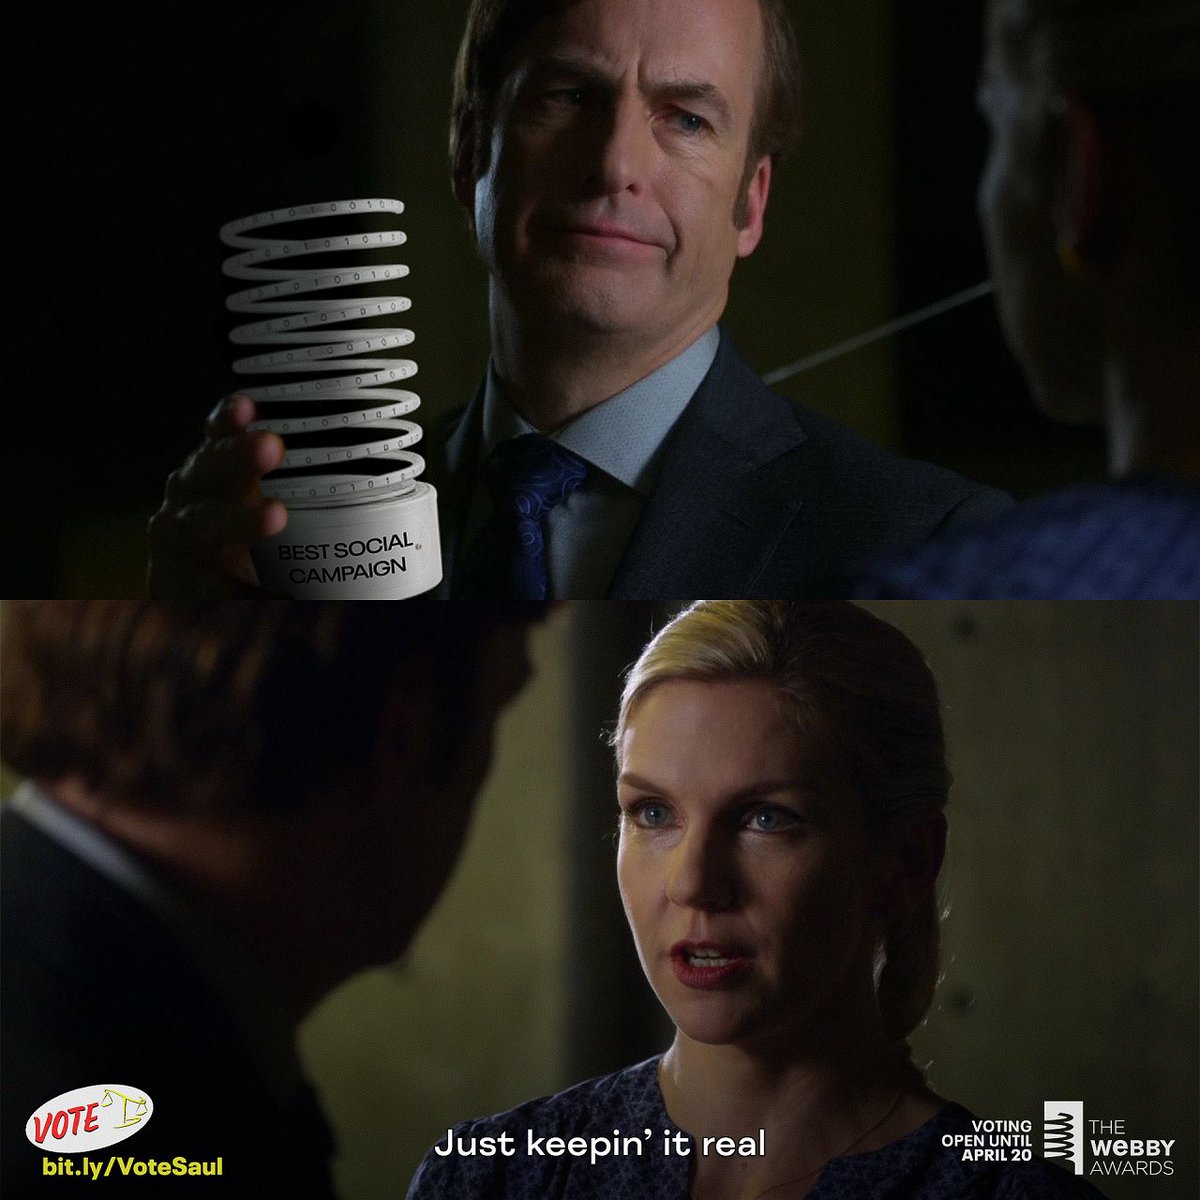 Help make this fantasy a reality. You have until Thursday to vote for #BetterCallSaul in this year's #WebbyAwards: bit.ly/VoteSaul